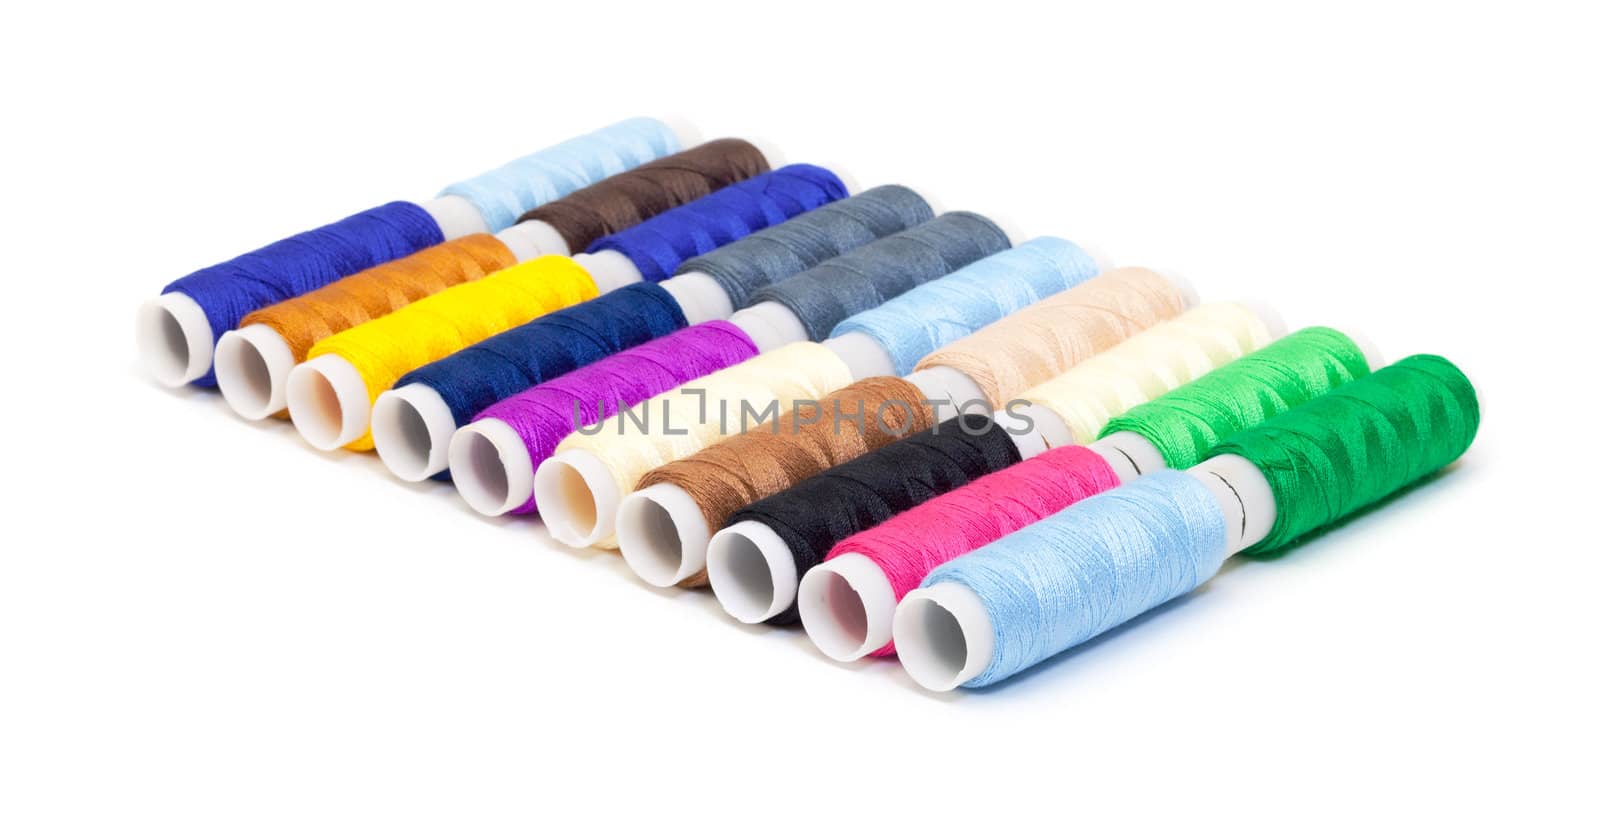 Several Multicolor Spools of Thread on white background